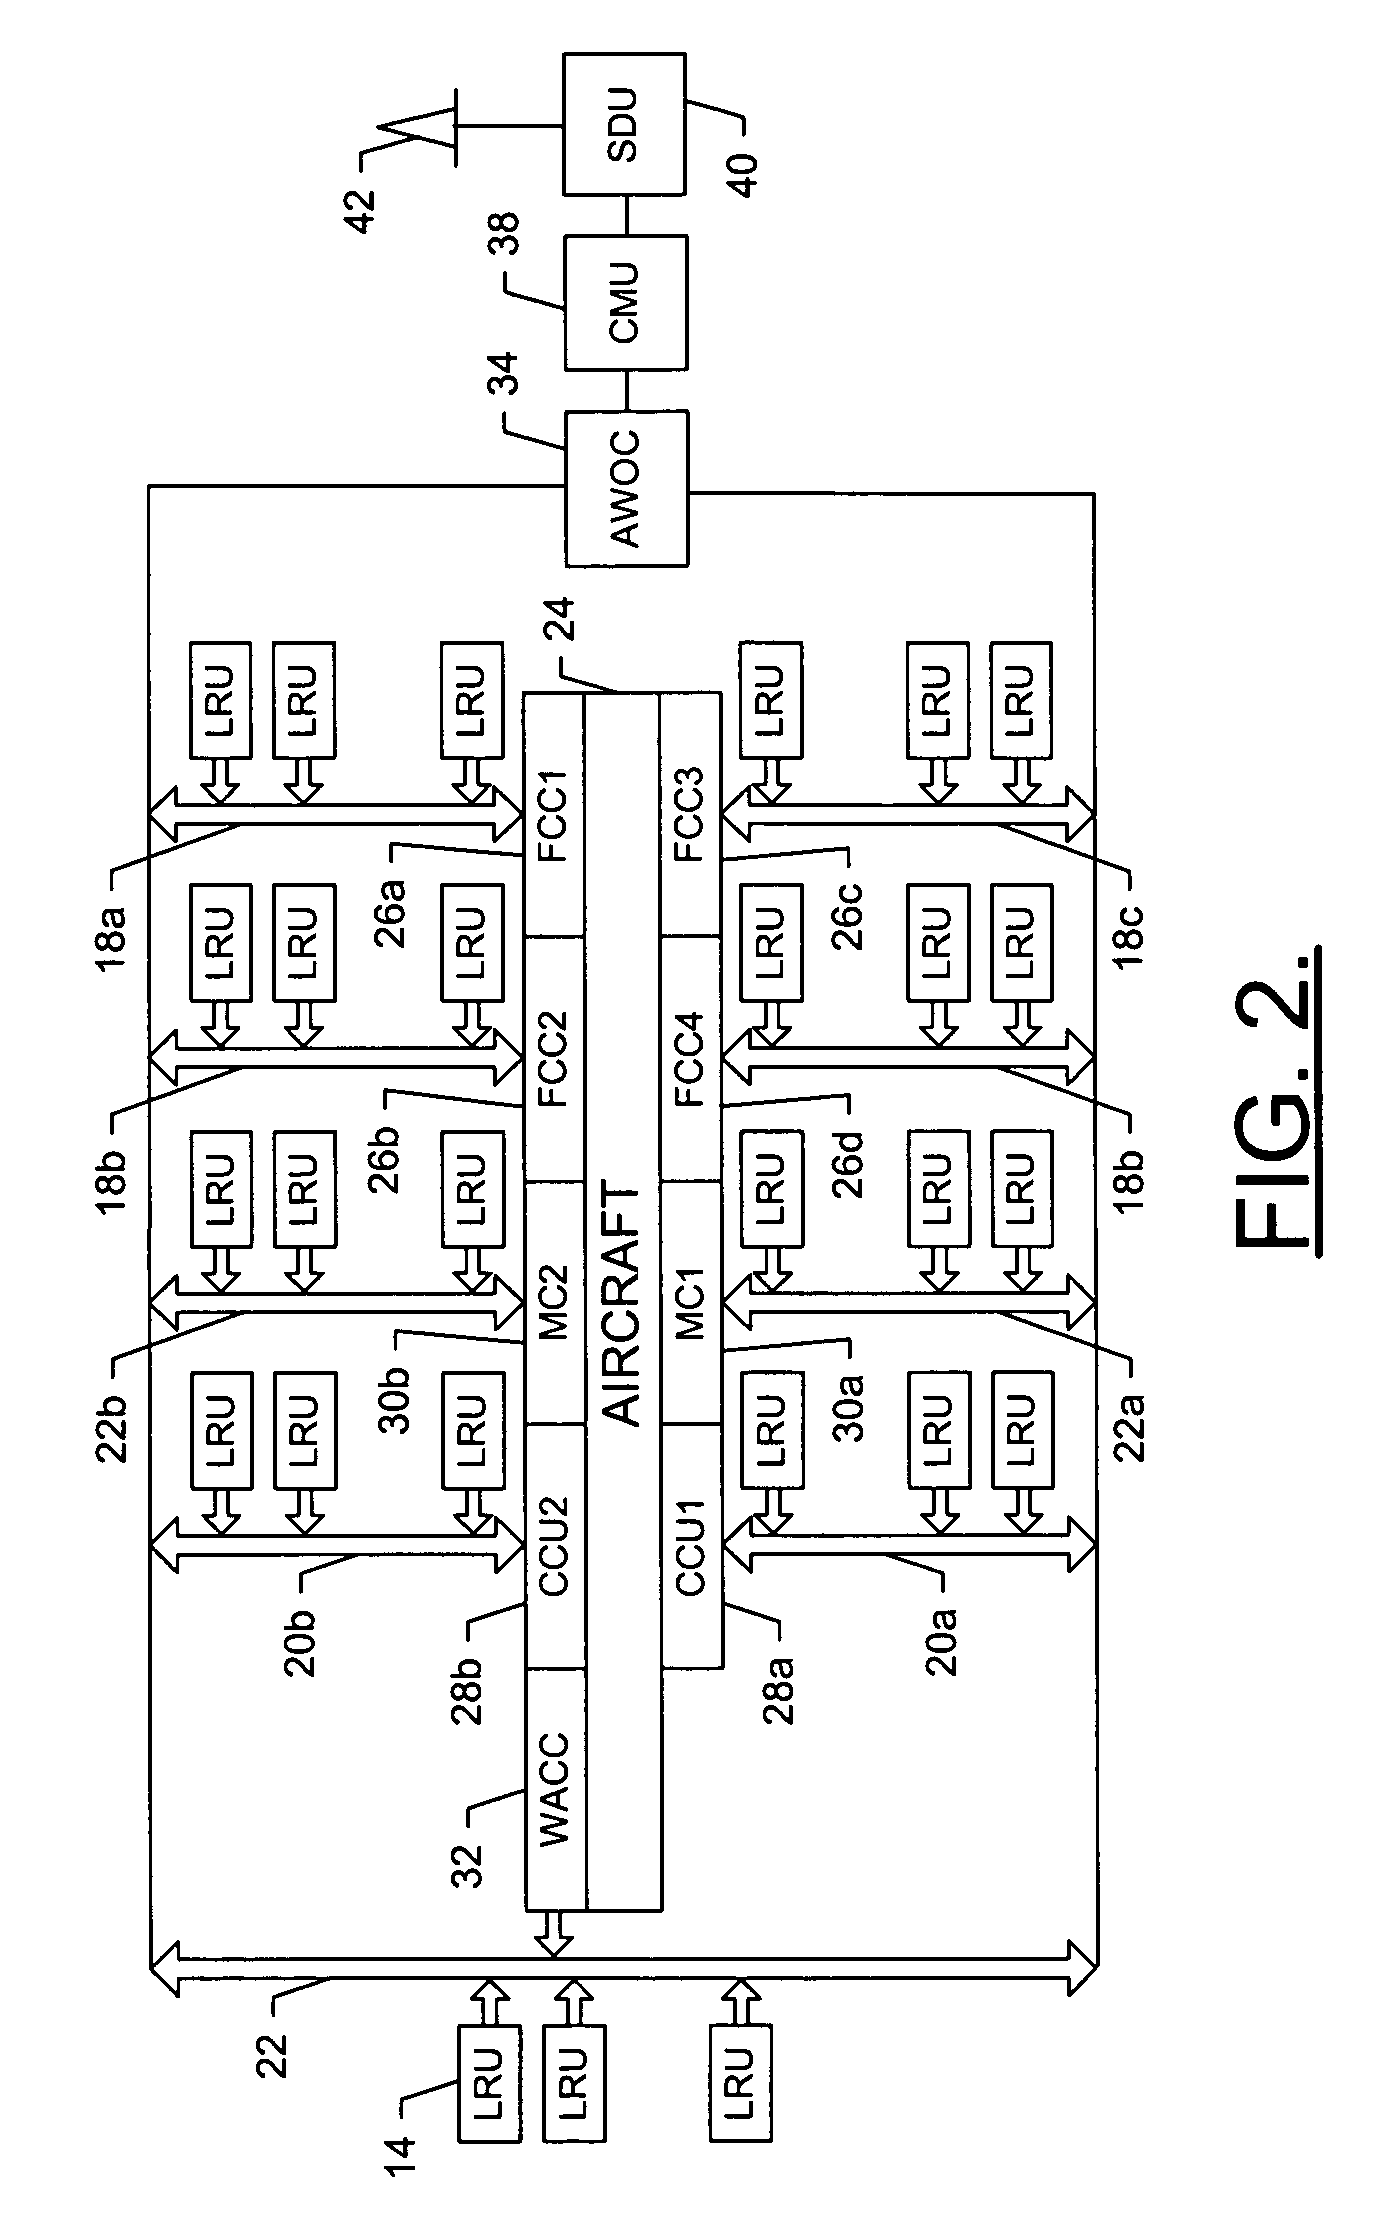 Systems and methods of recording events onboard a vehicle